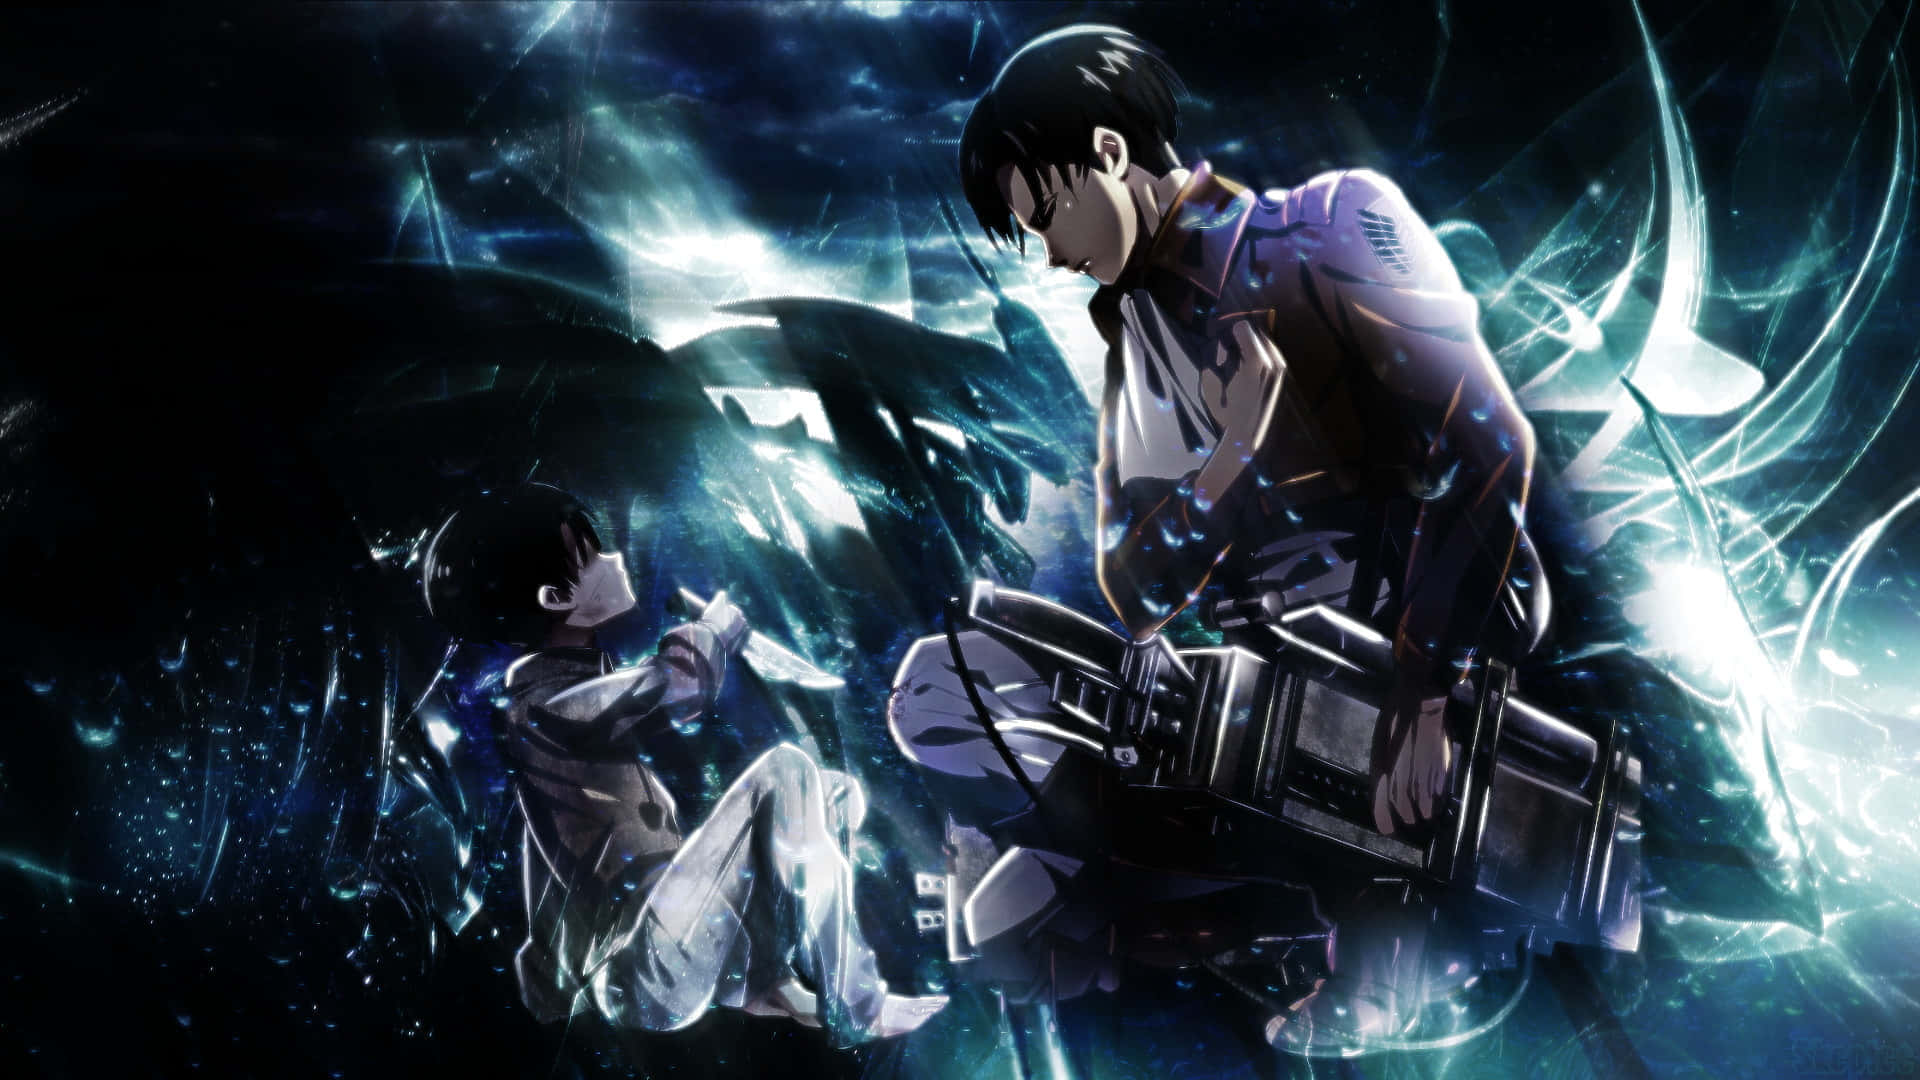 Join the fight with 'Attack On Titan' Wallpaper